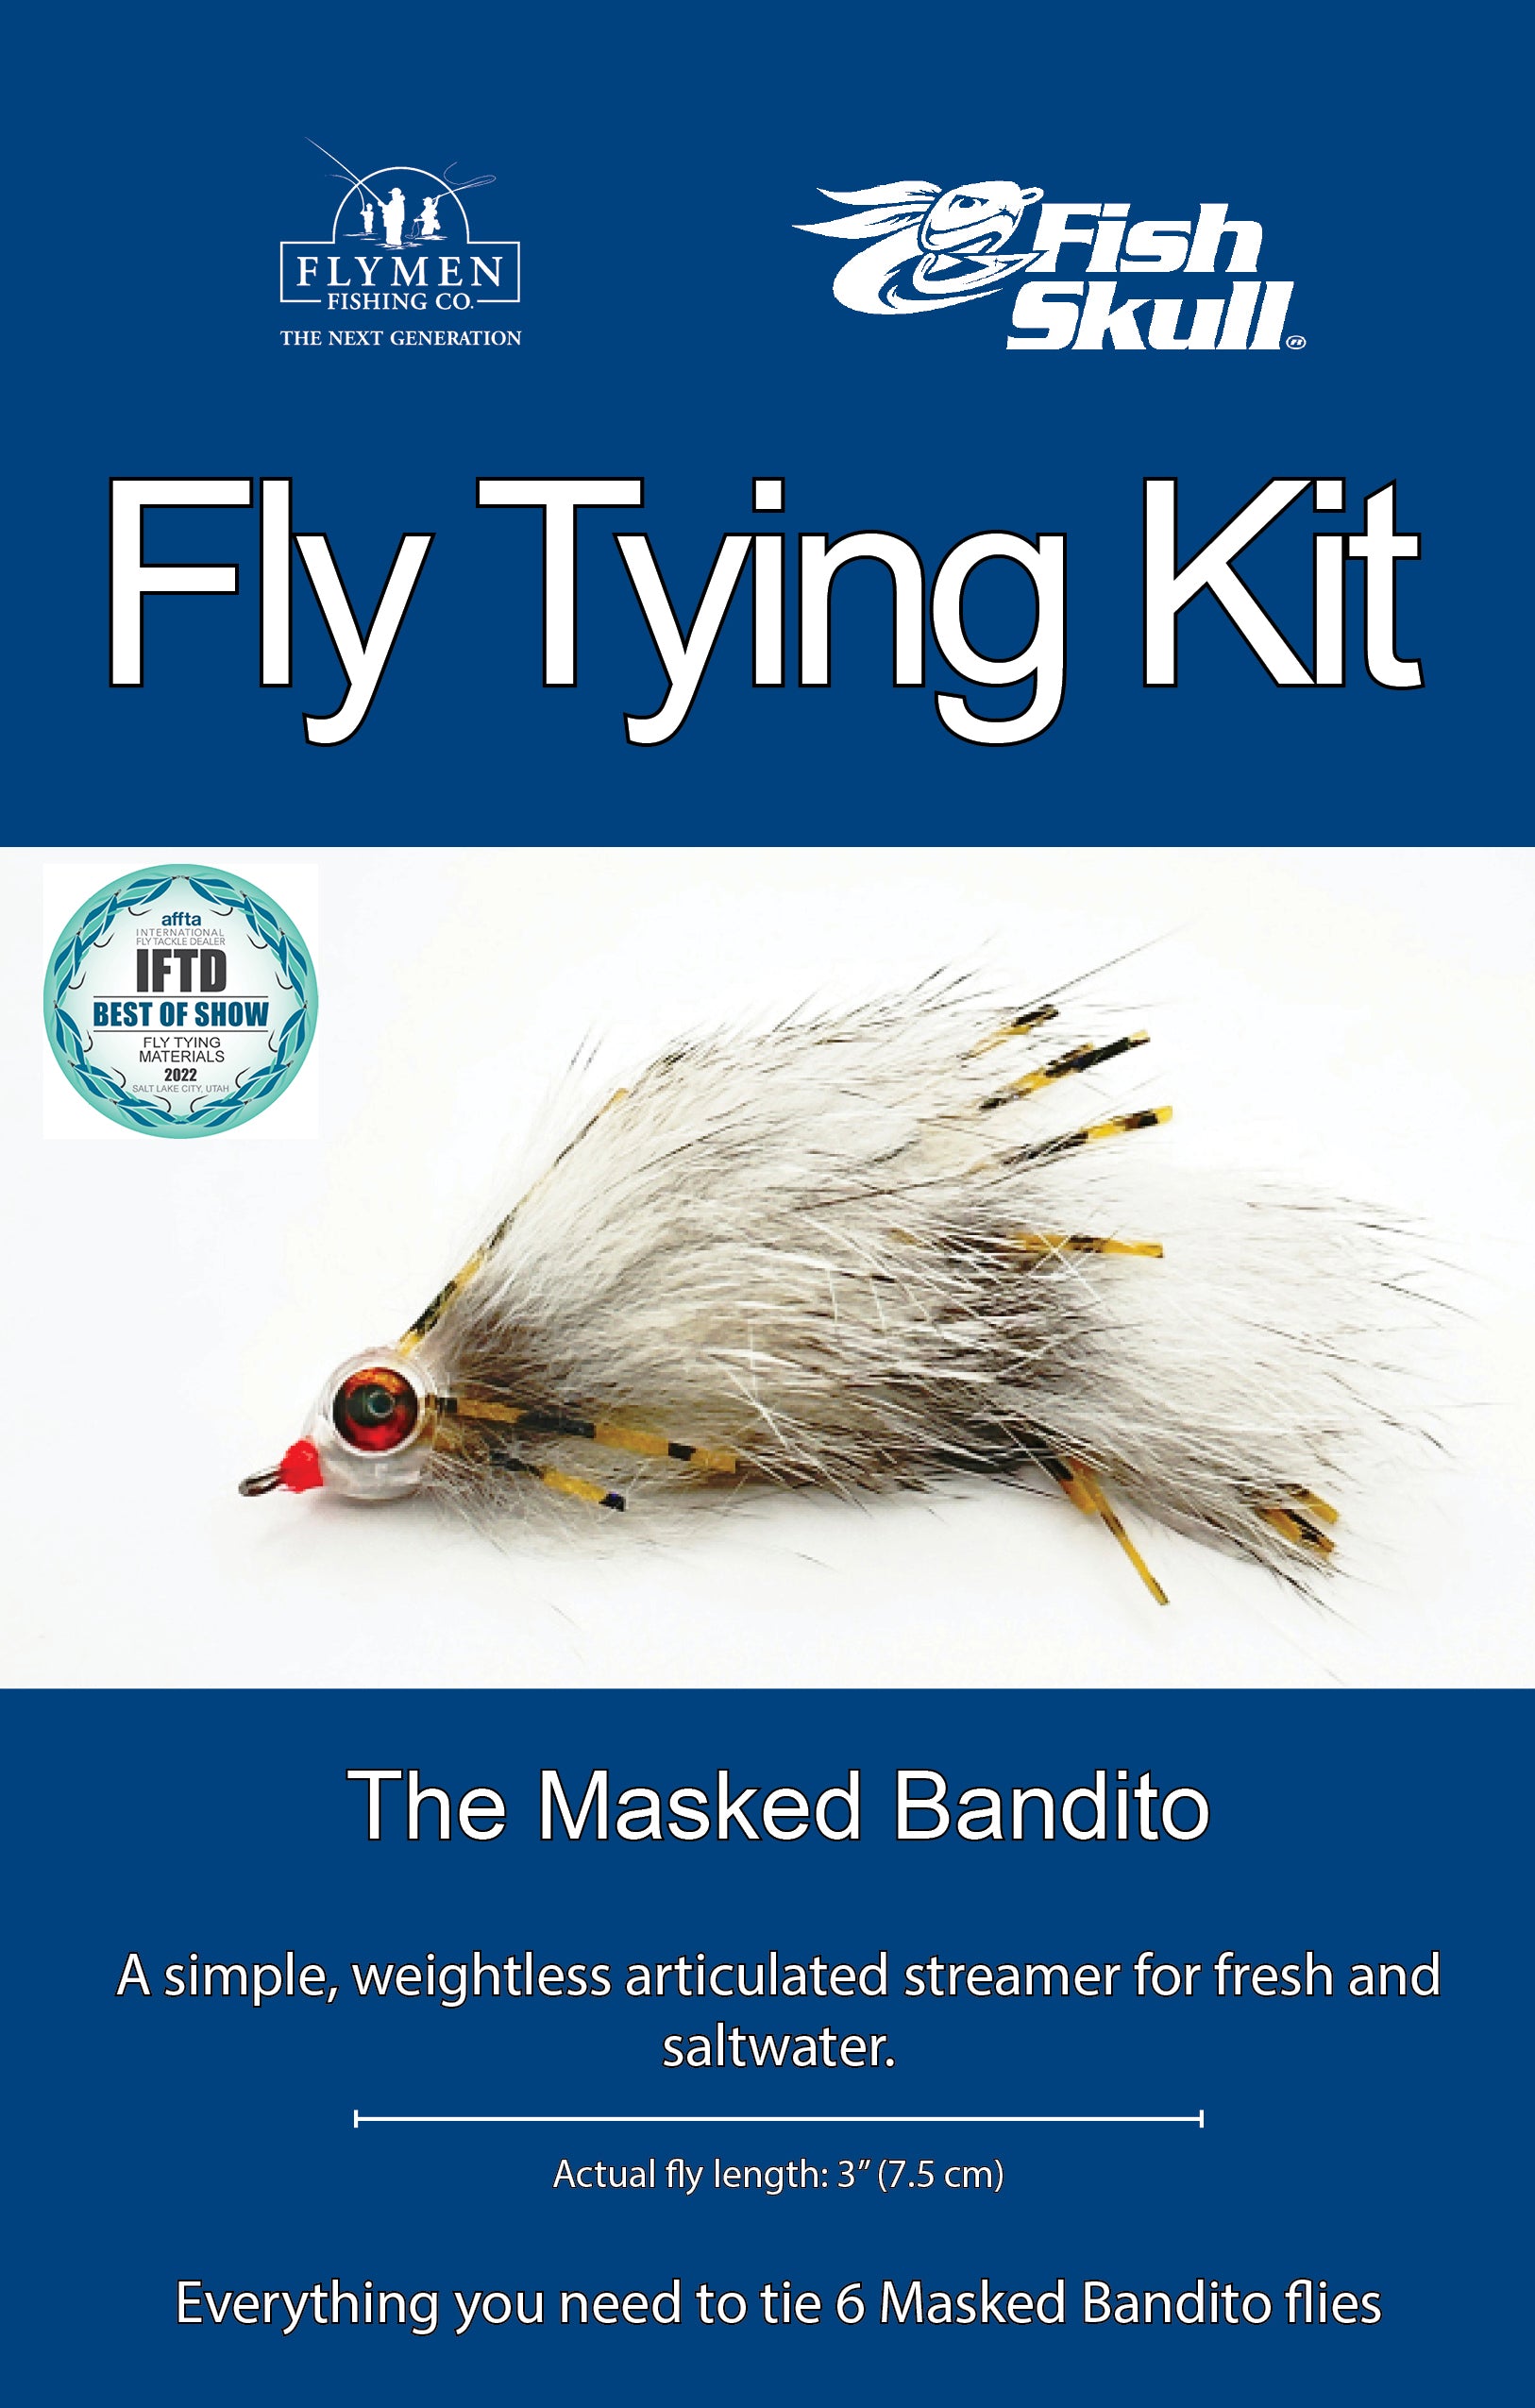 Tying Kits for Fly Fishing